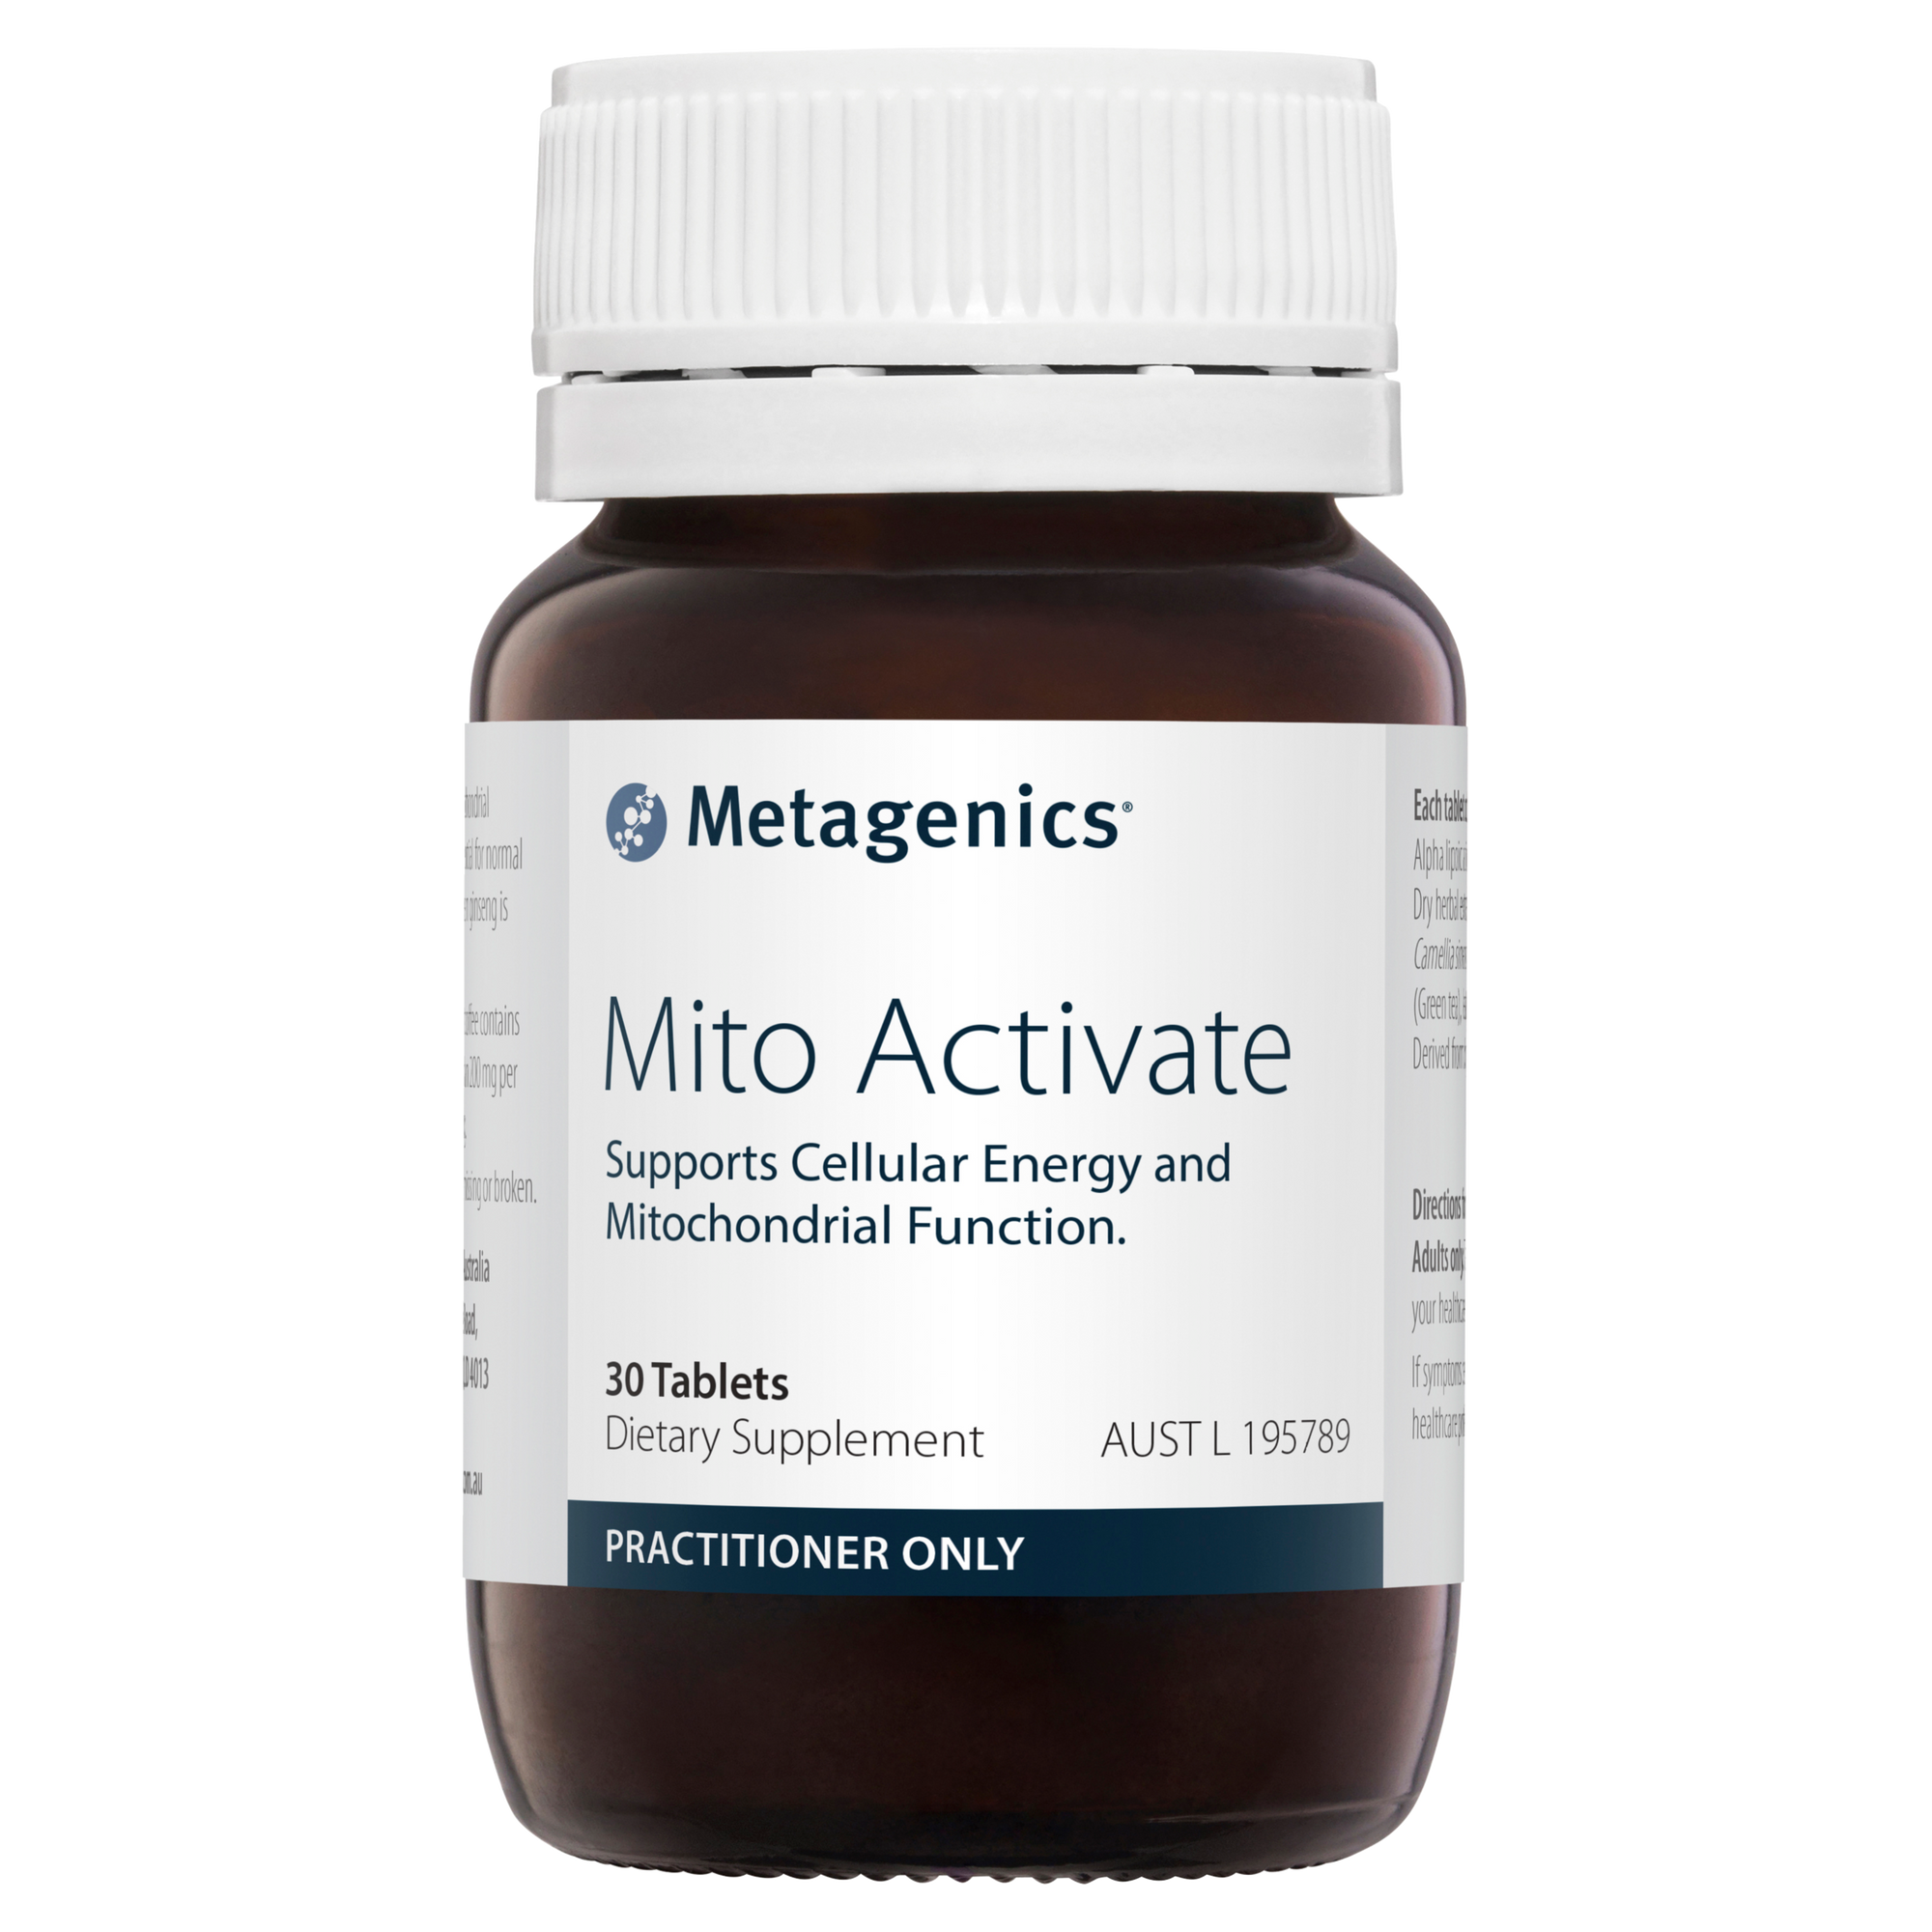 Metagenics Mito Activate 30 Tablets